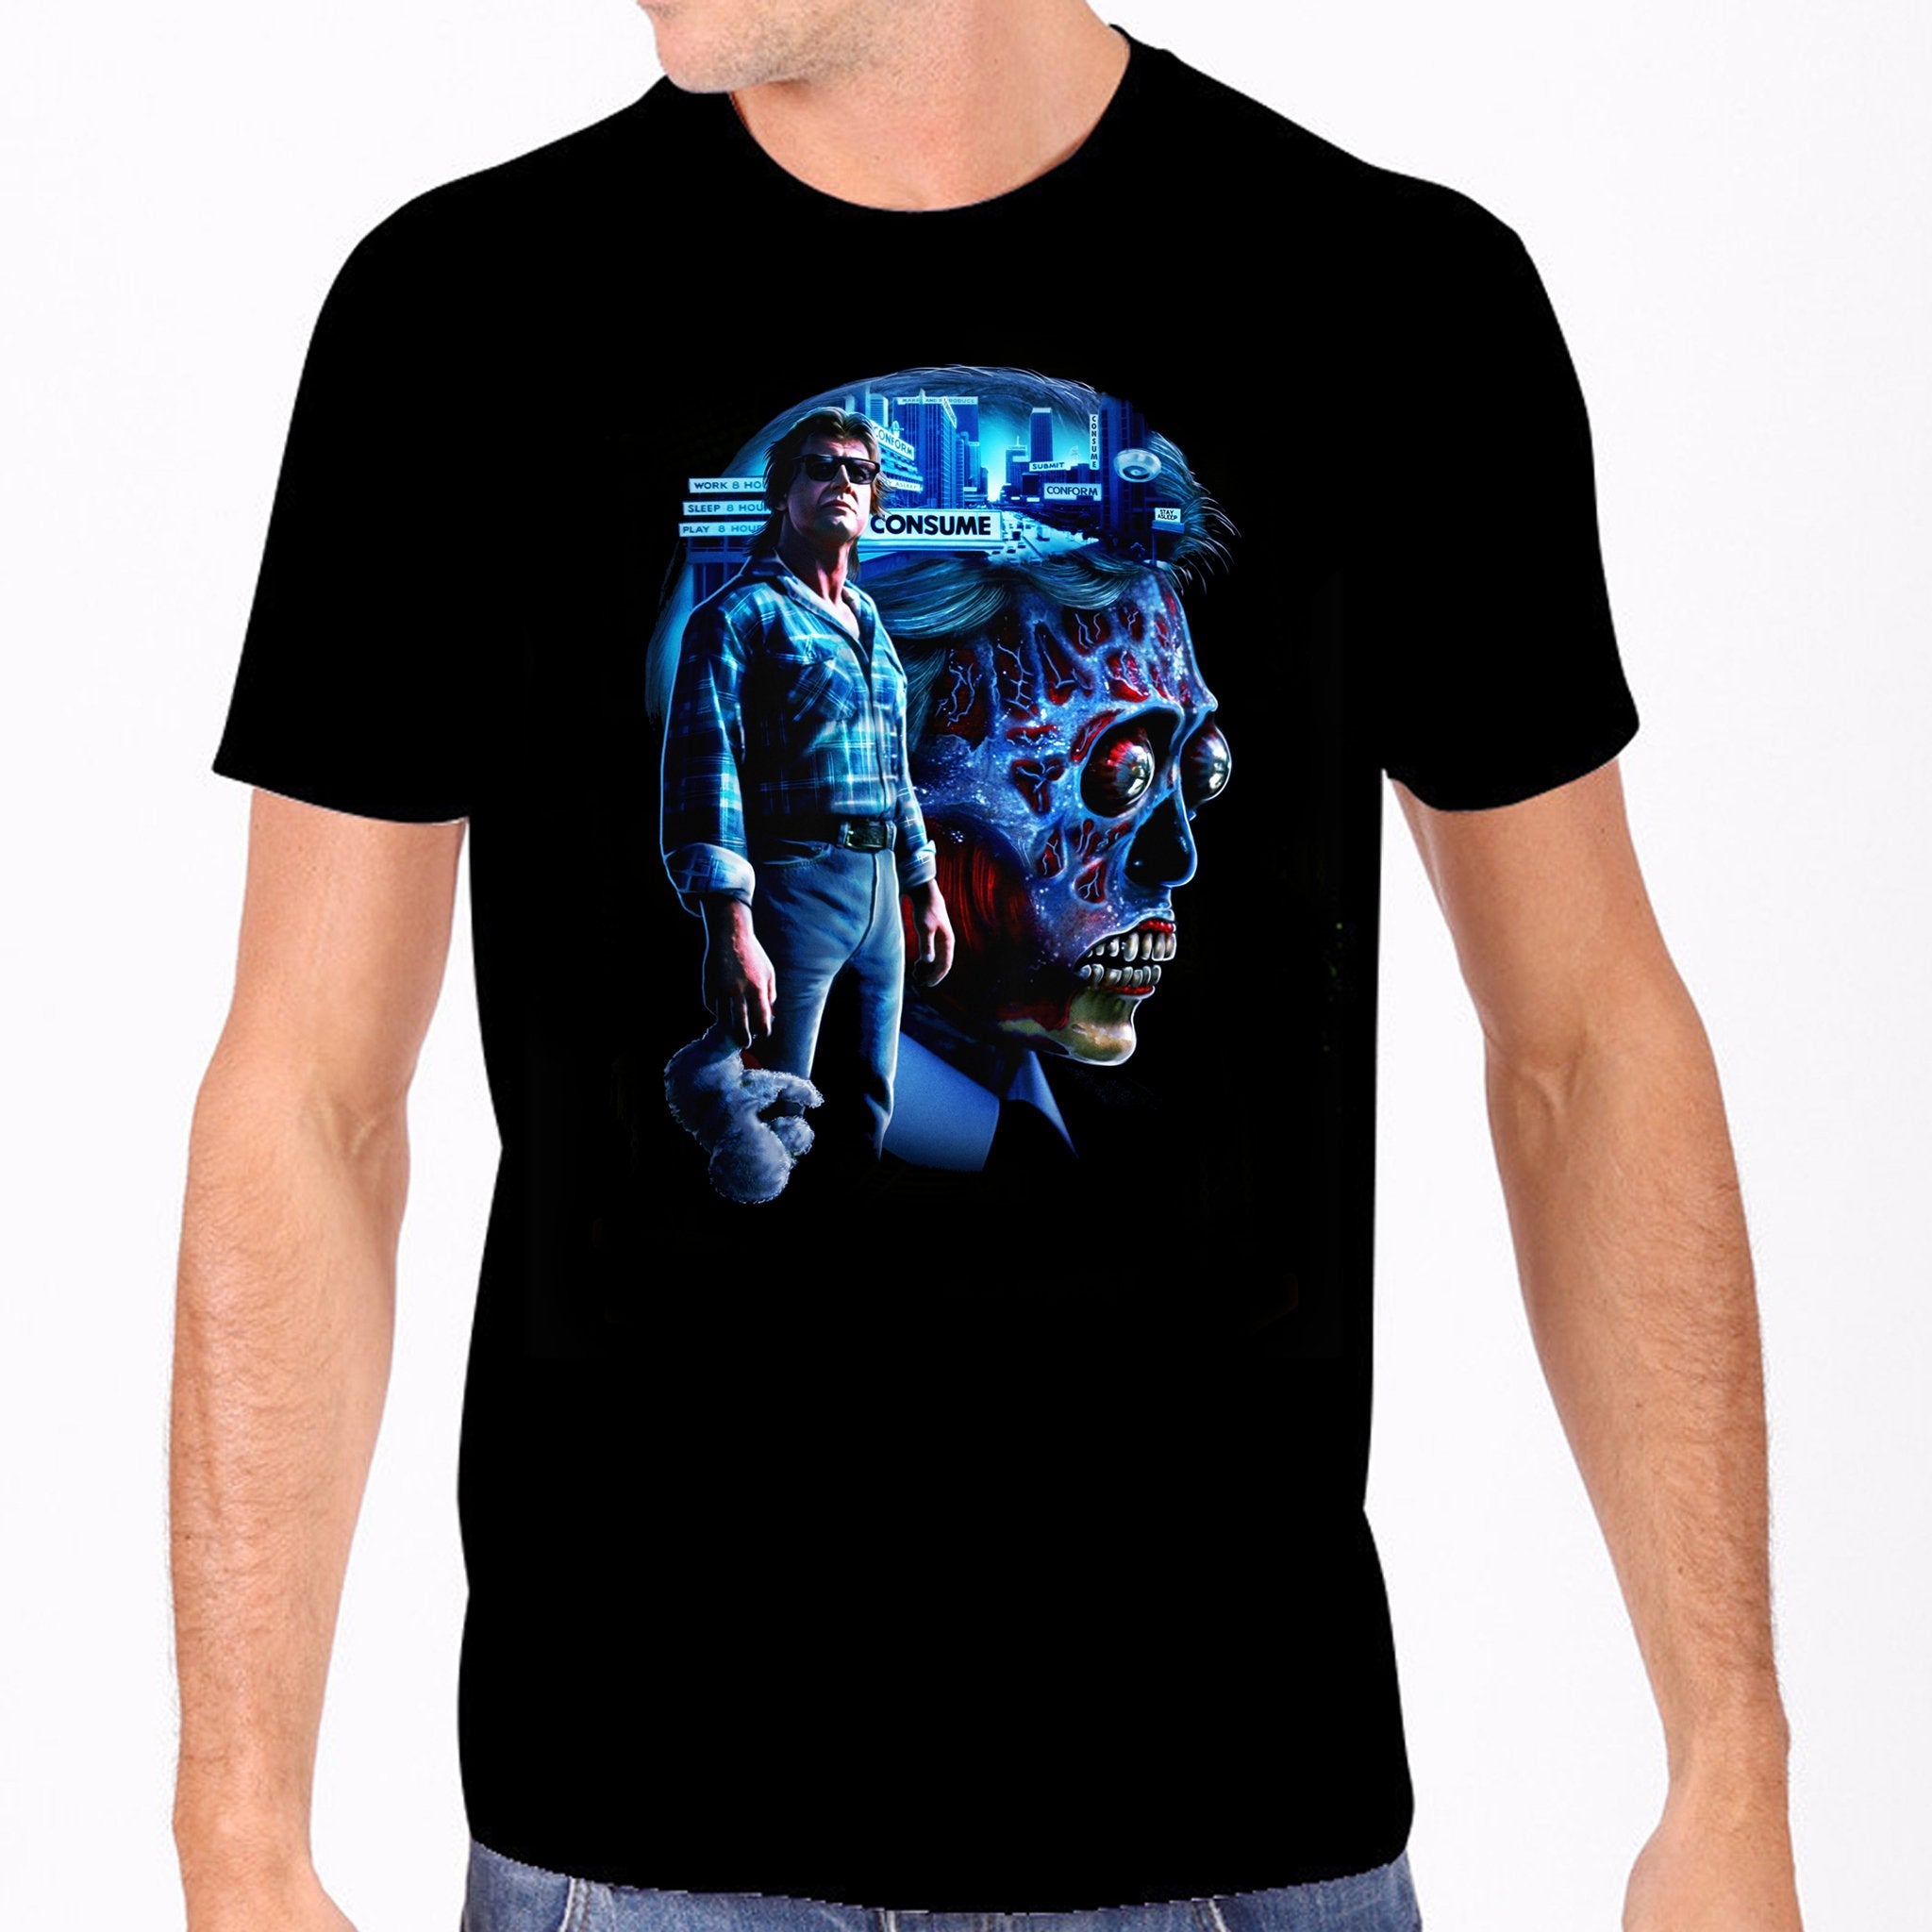 Guy's sizing fitted black 100% Cotton tee with imagery for John Carpenter's 1988 sci-fi cult classic They Live, shown on model